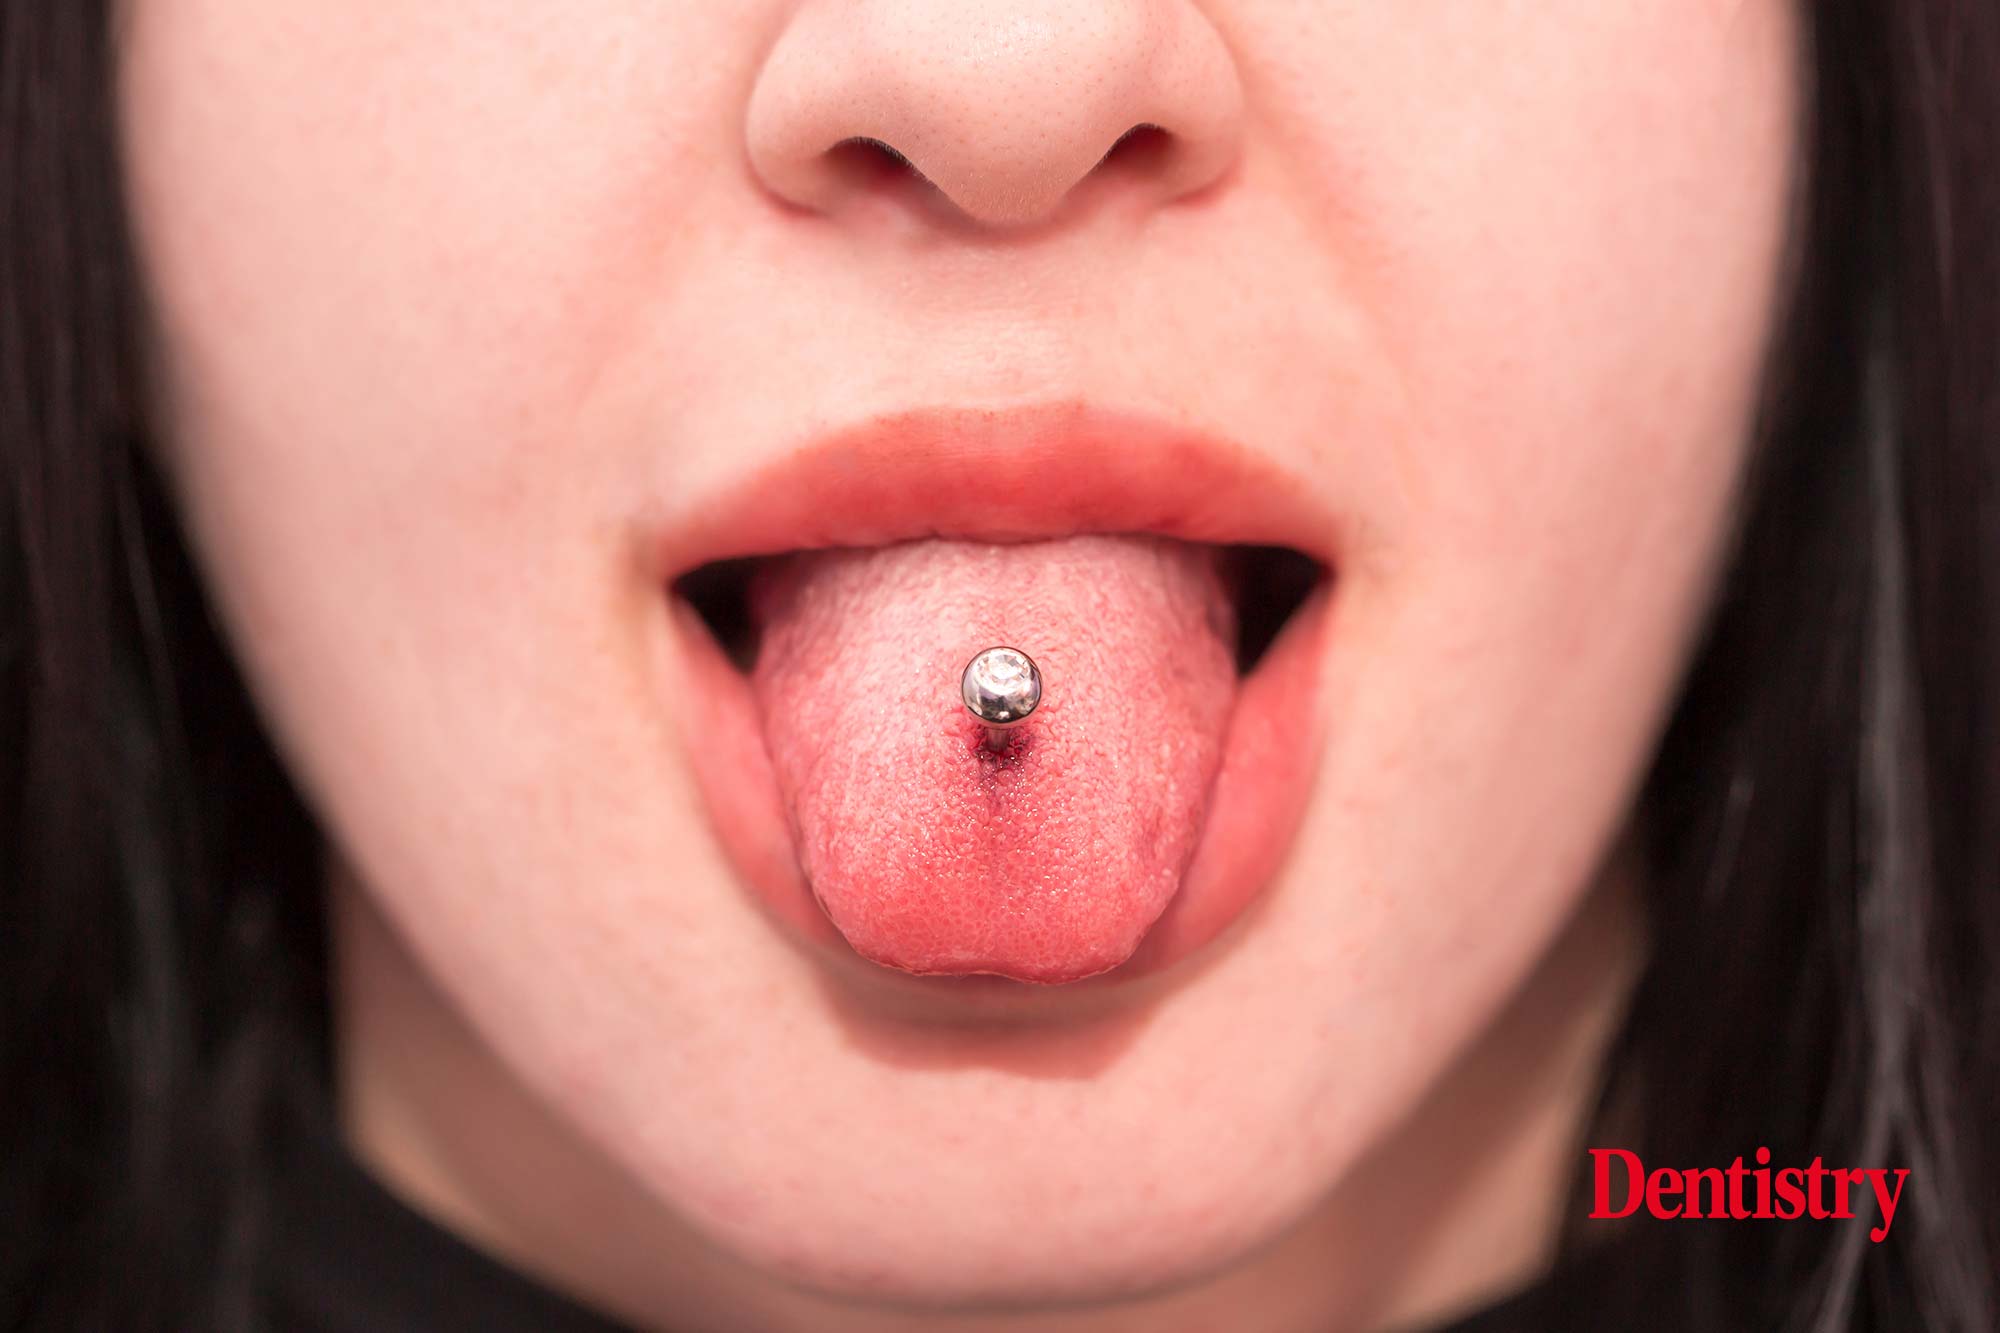 Oral piercing: what are the risks?